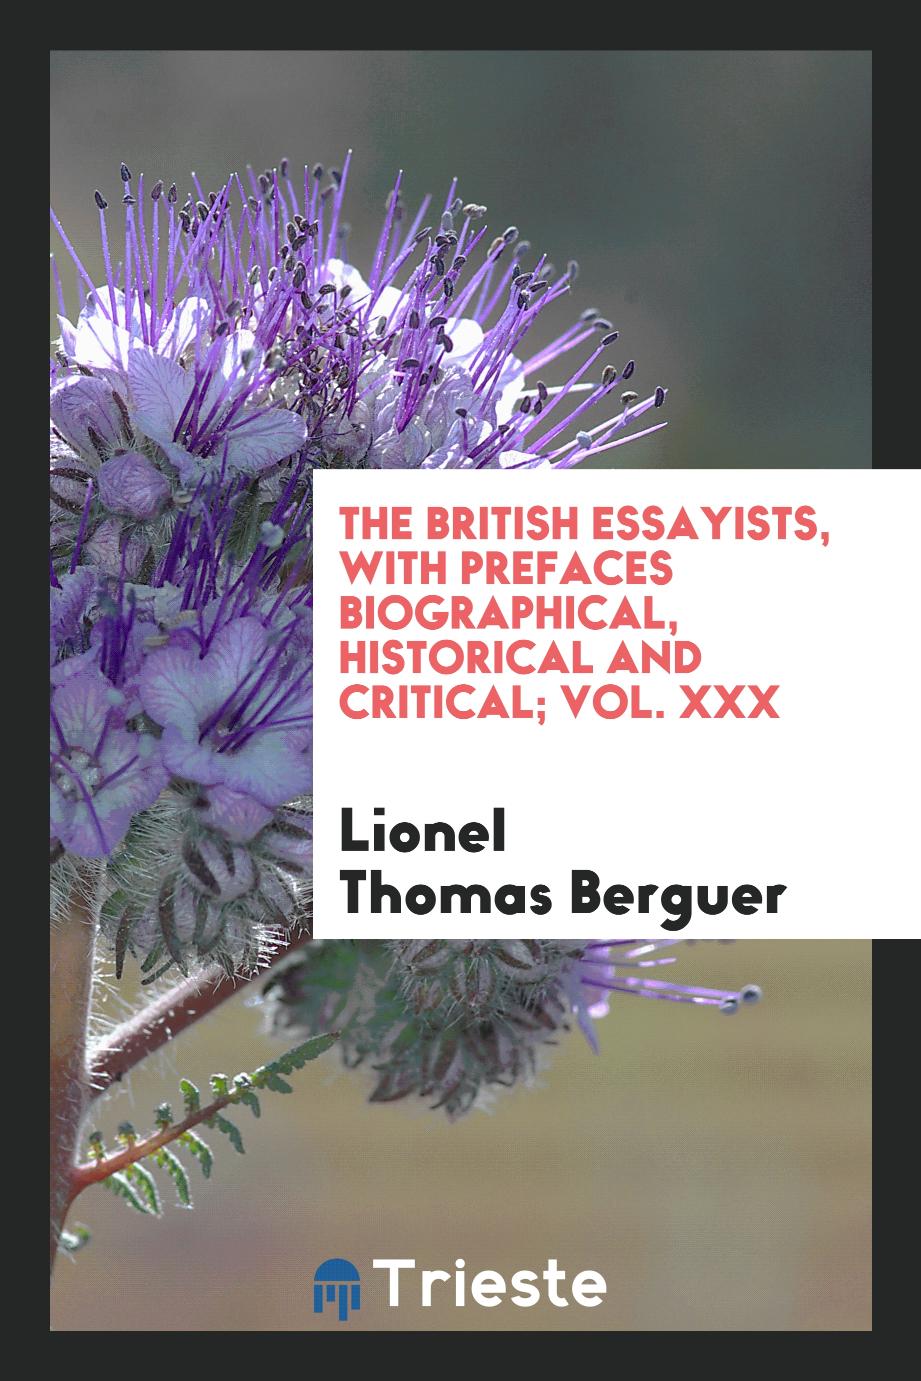 The British essayists, with prefaces biographical, historical and critical; Vol. XXX